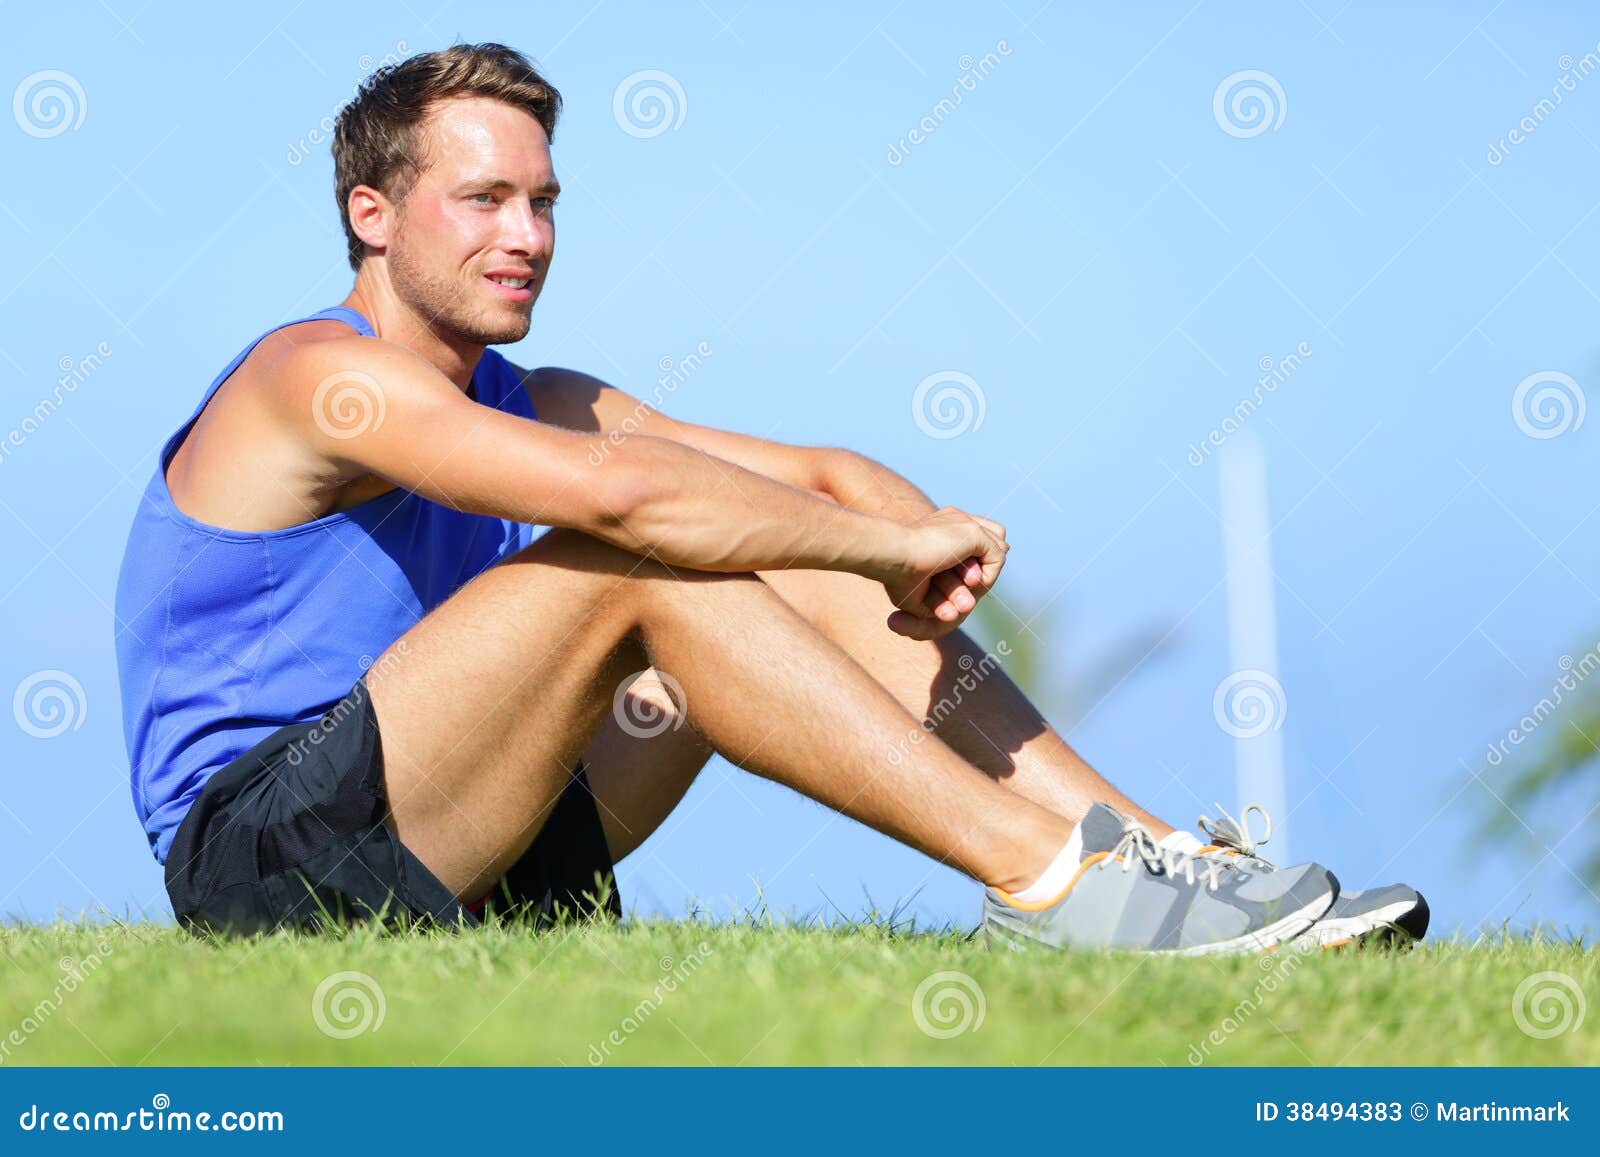 Sport Fitness Man Relaxing After Training Stock Image ...